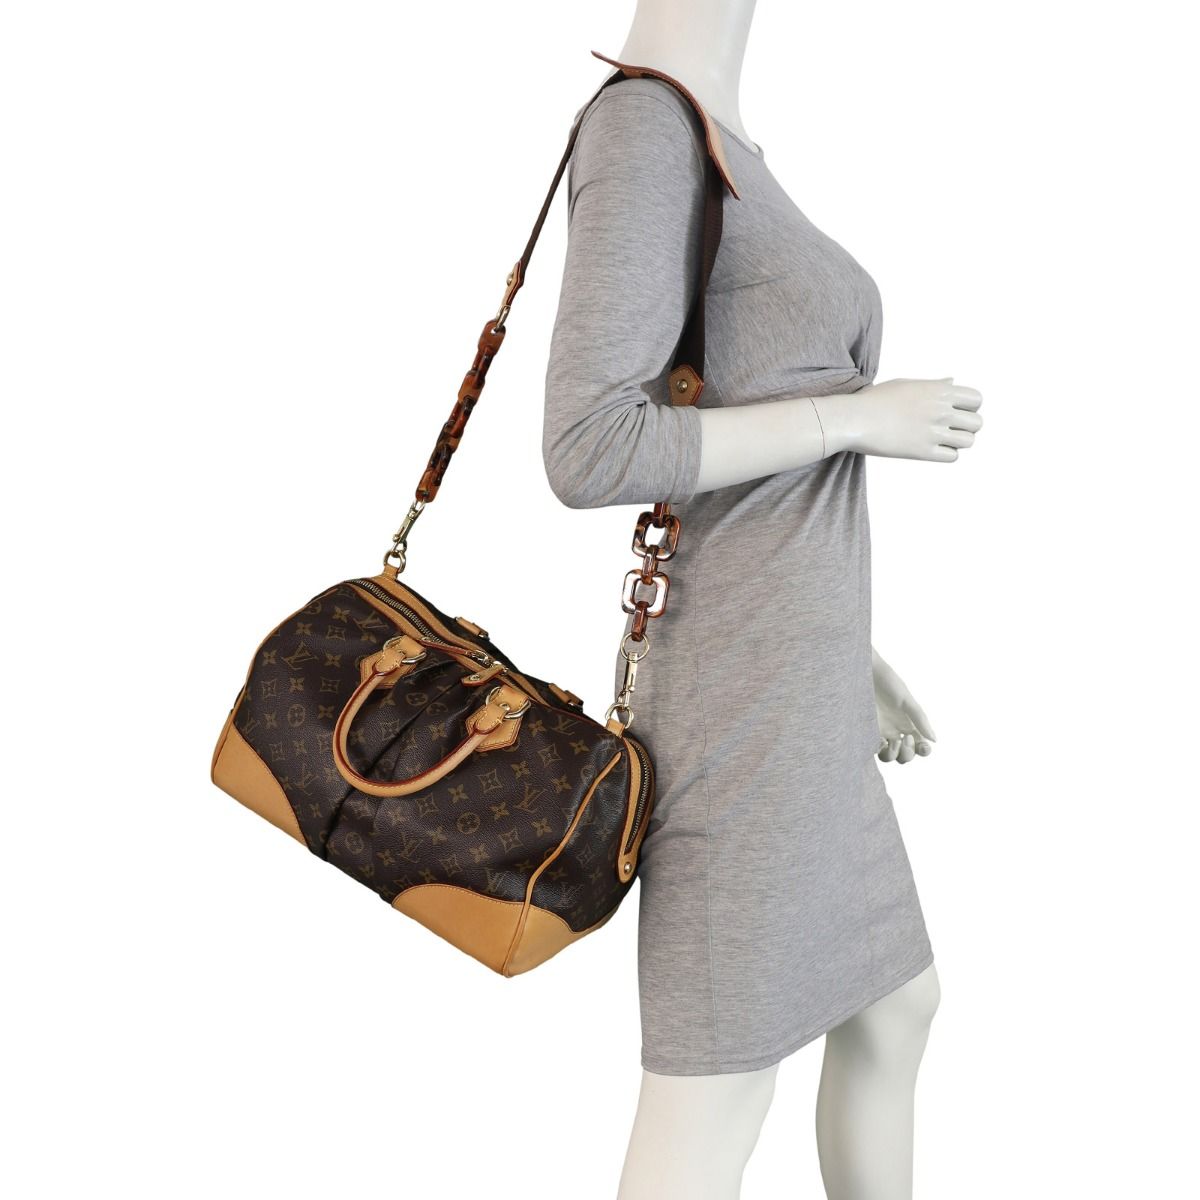 Stephen sprouse boston leather handbag Louis Vuitton Brown in Leather -  31704585